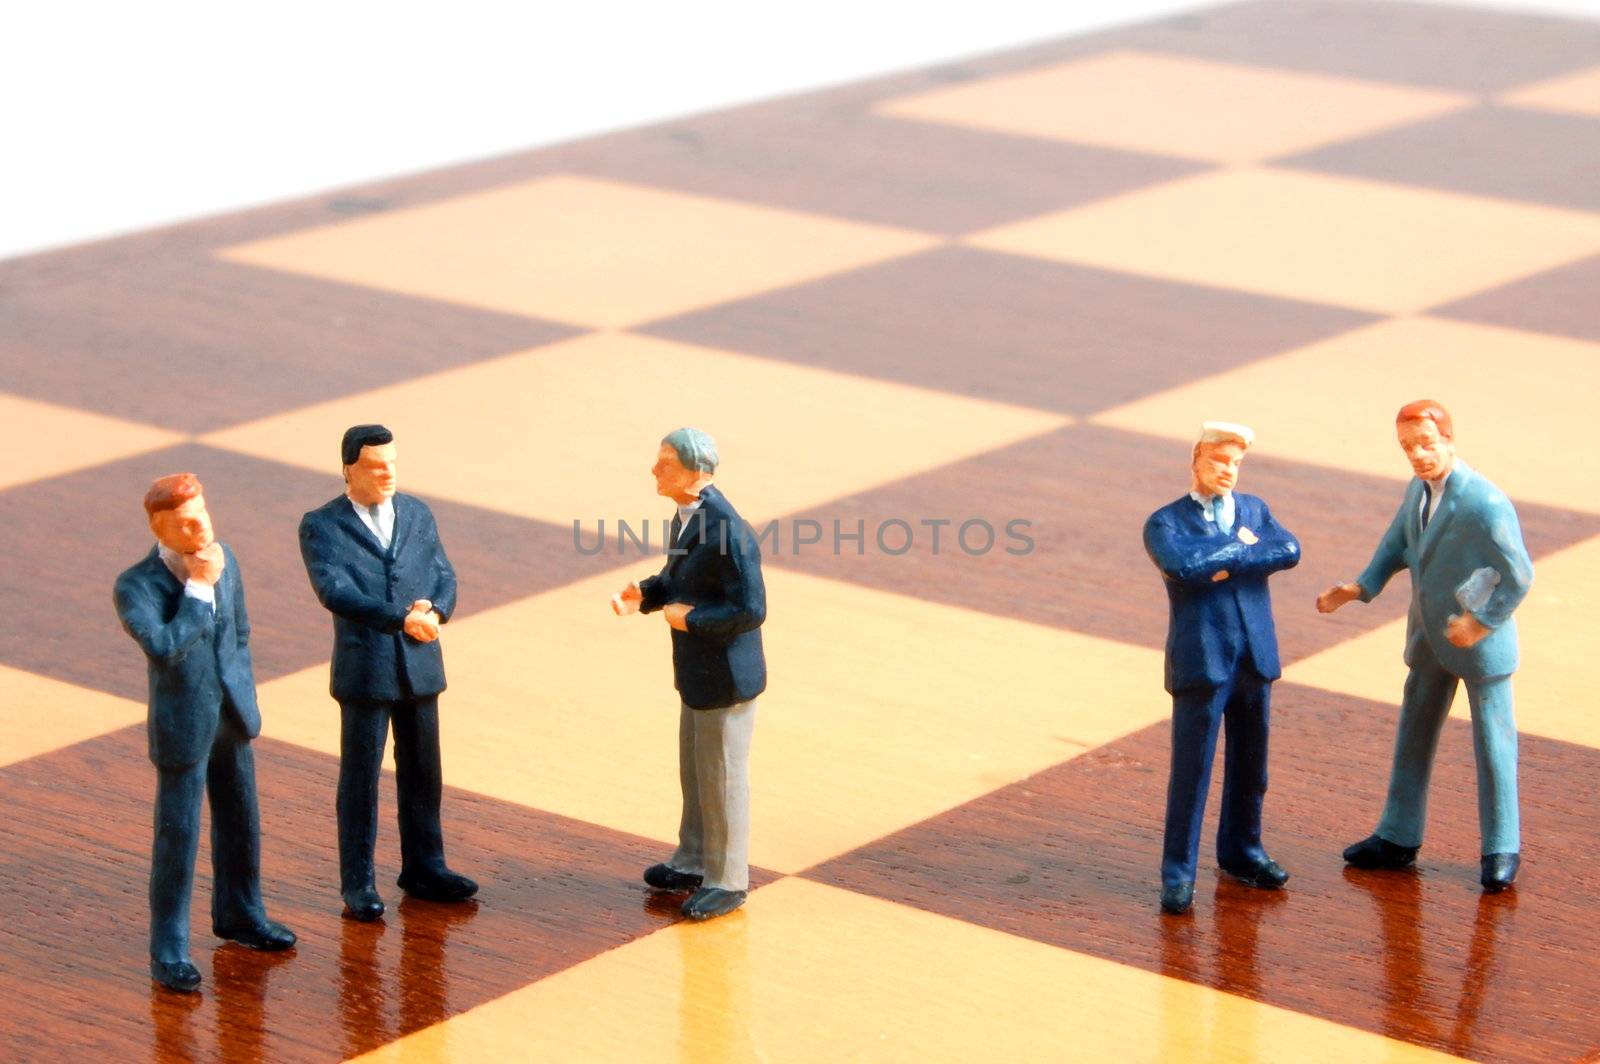 group uf business people standing on a chess board